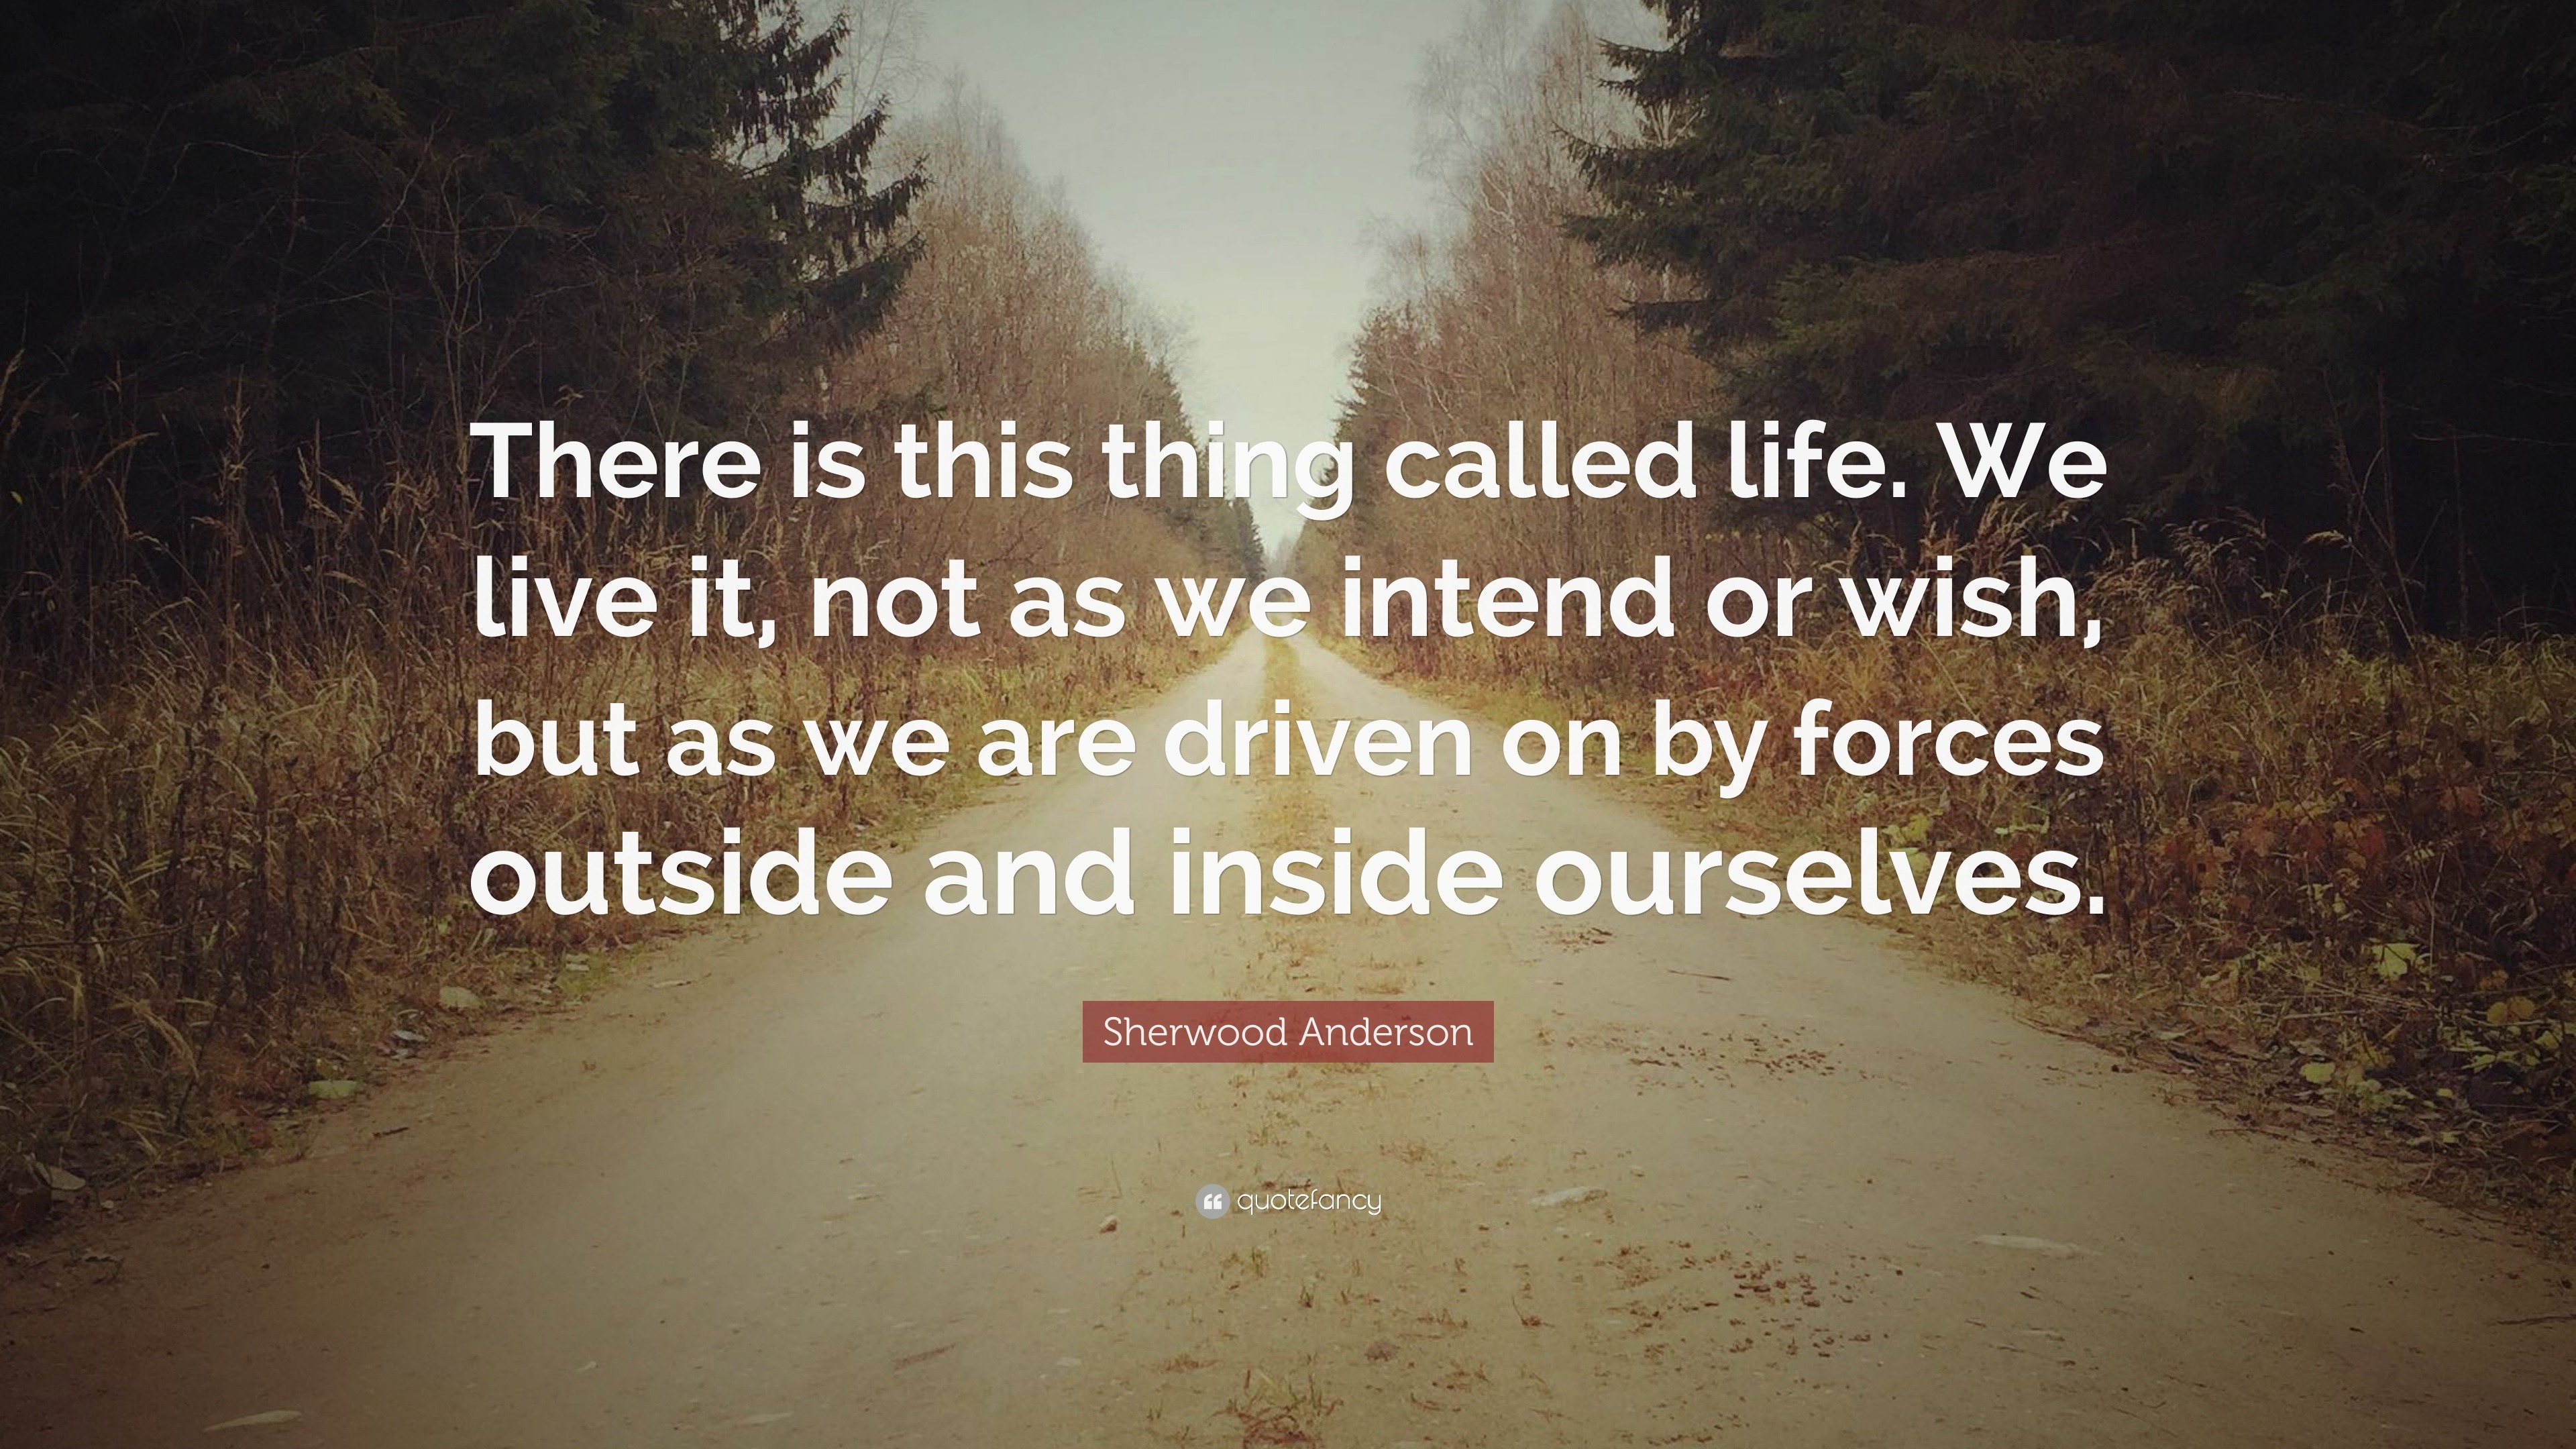 Sherwood Anderson Quote: “There is this thing called life. We live it ...